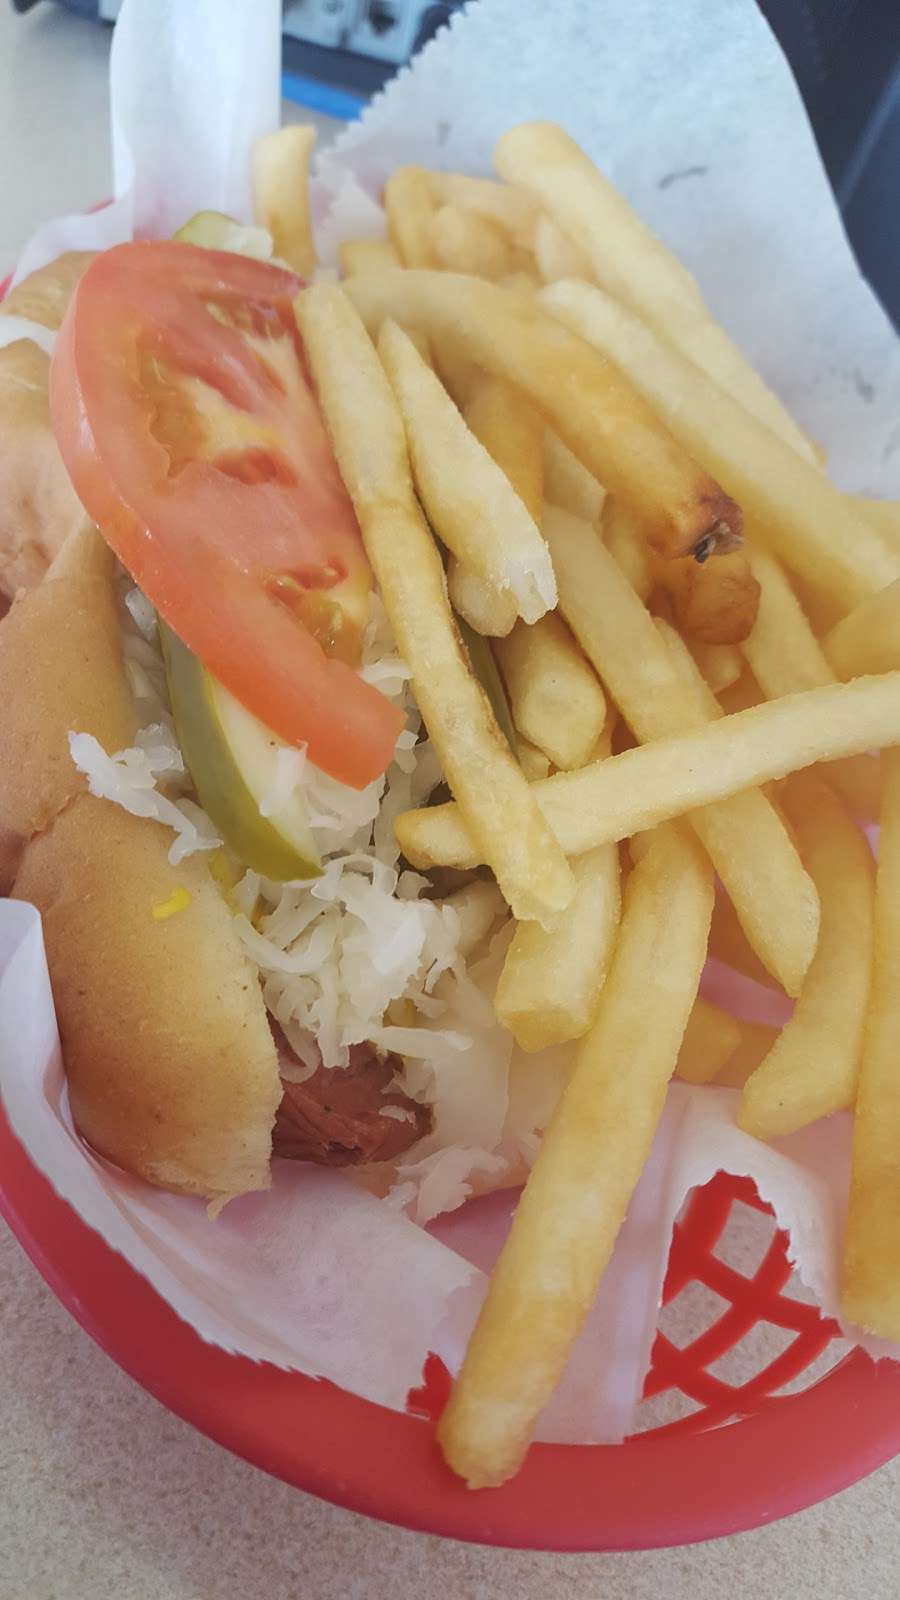 Arnies Dog House | 1503 Indianapolis Blvd, Whiting, IN 46394 | Phone: (219) 659-3004